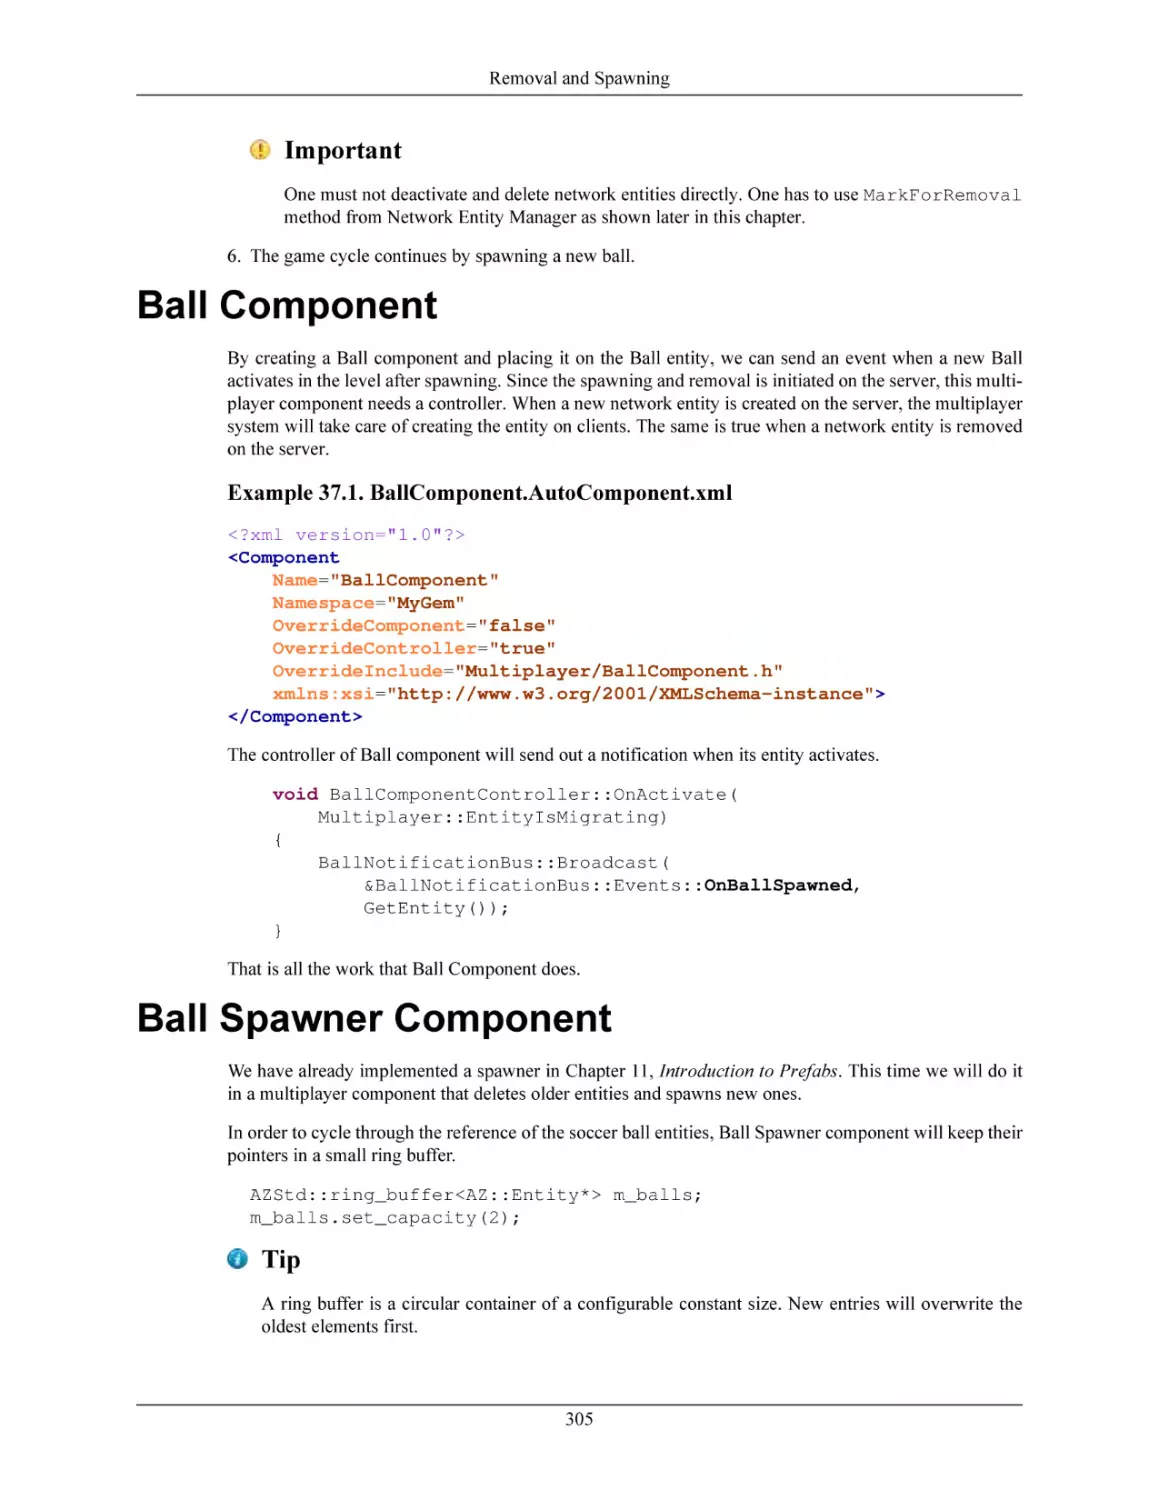 Ball Component
Ball Spawner Component